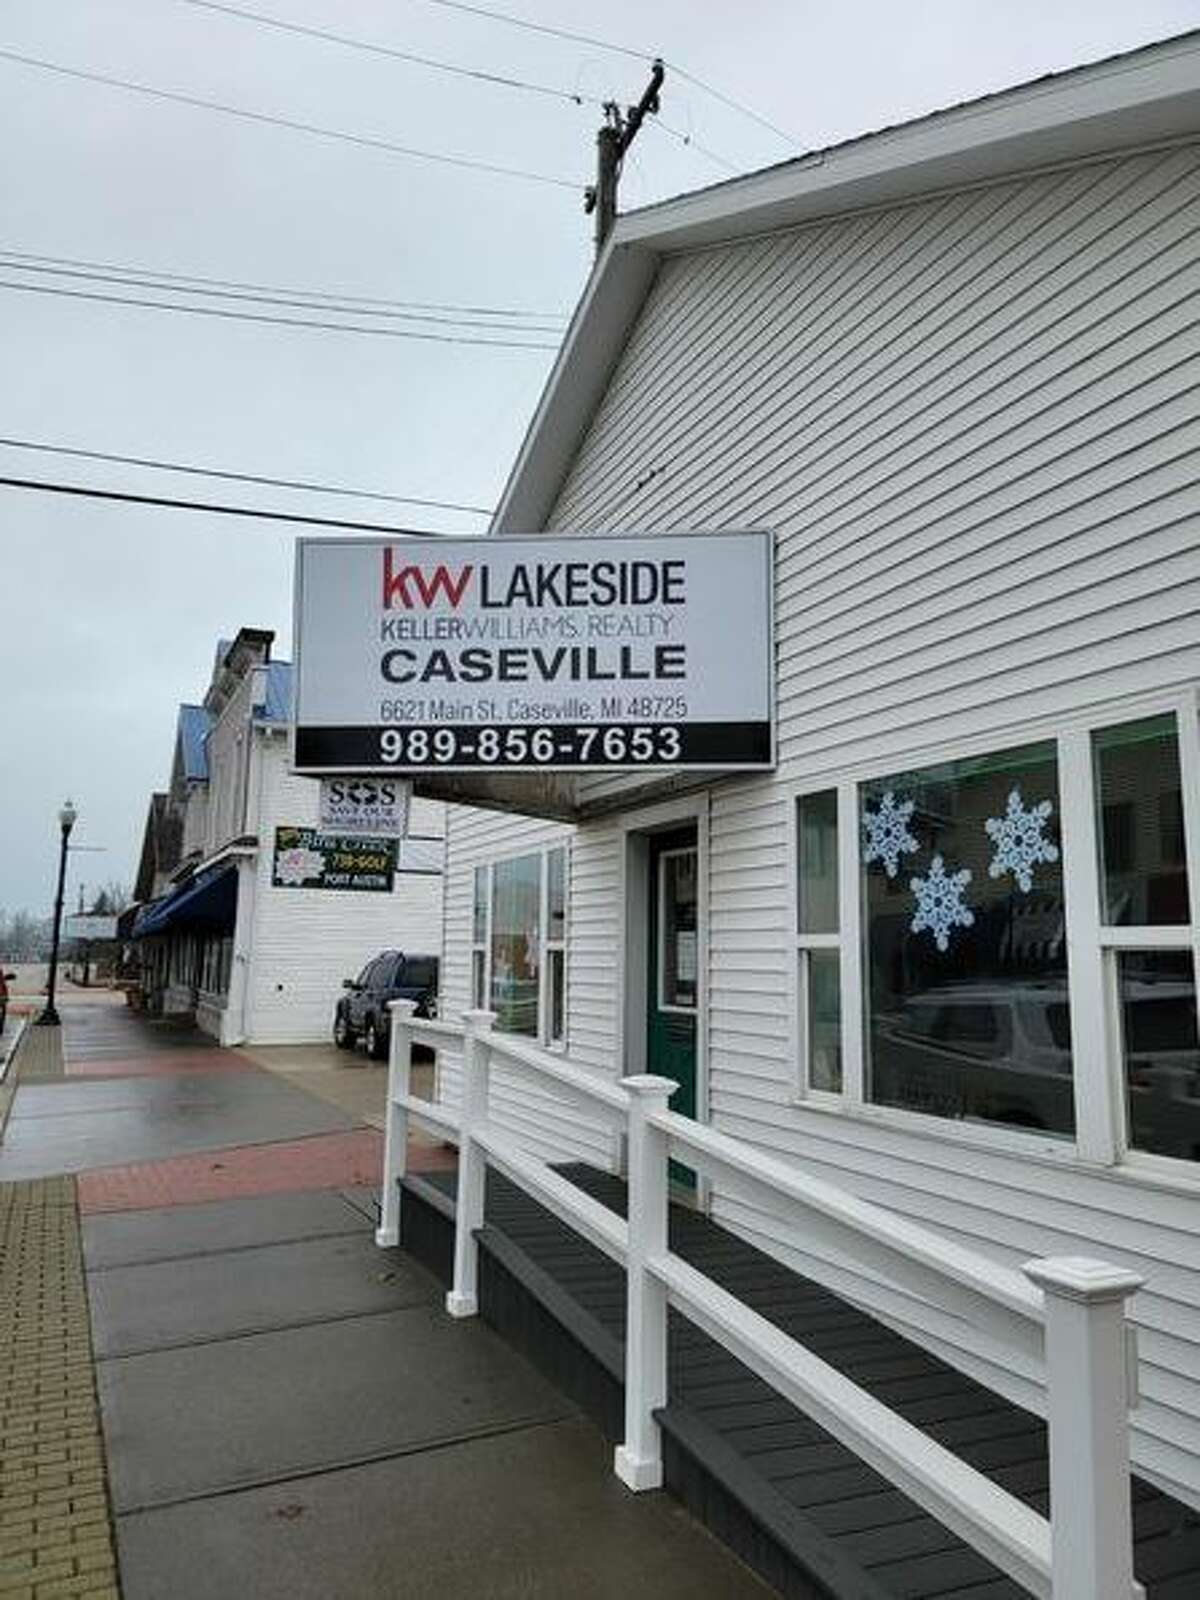 KW Lakeside has taken over the former David Kraft Realty where they have been transitioning over with the team Kraft has build now a part of KW Lakeside's forth location.